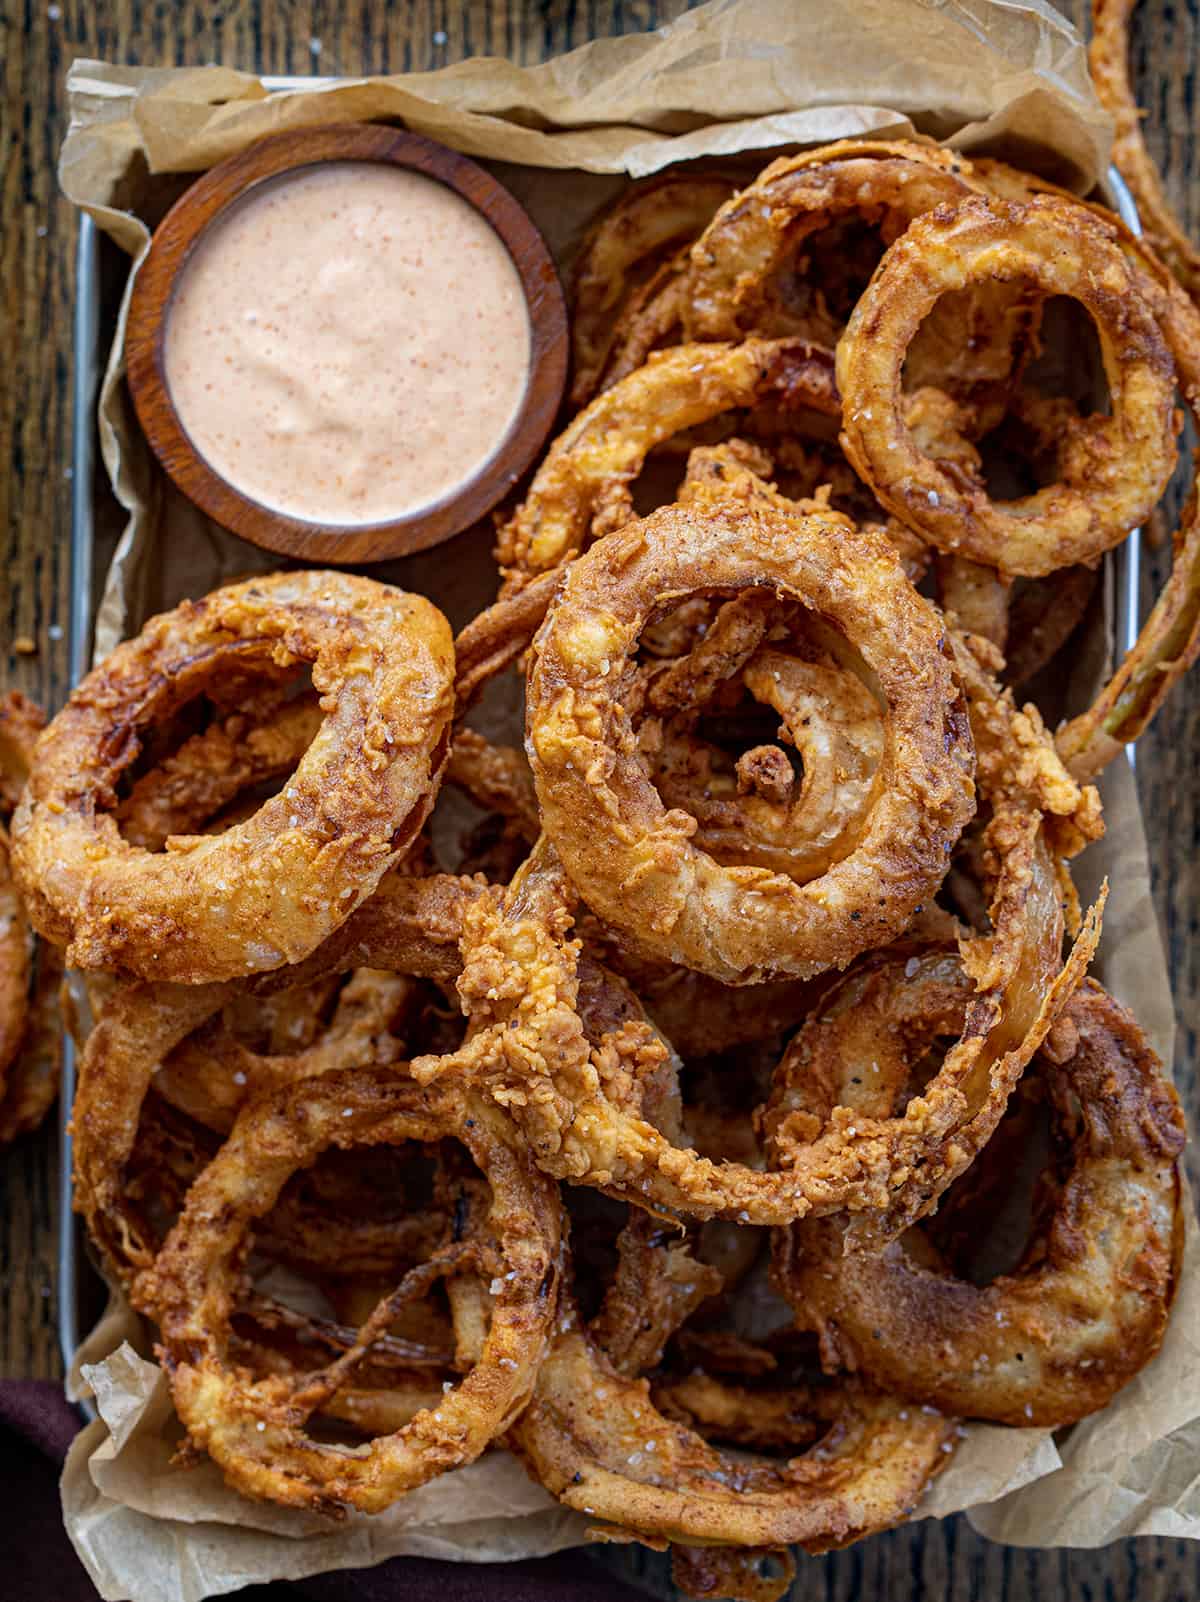 Pan of Onion Rings with Fry Sauce on Crumpled Parchment Paper from Overhead. 